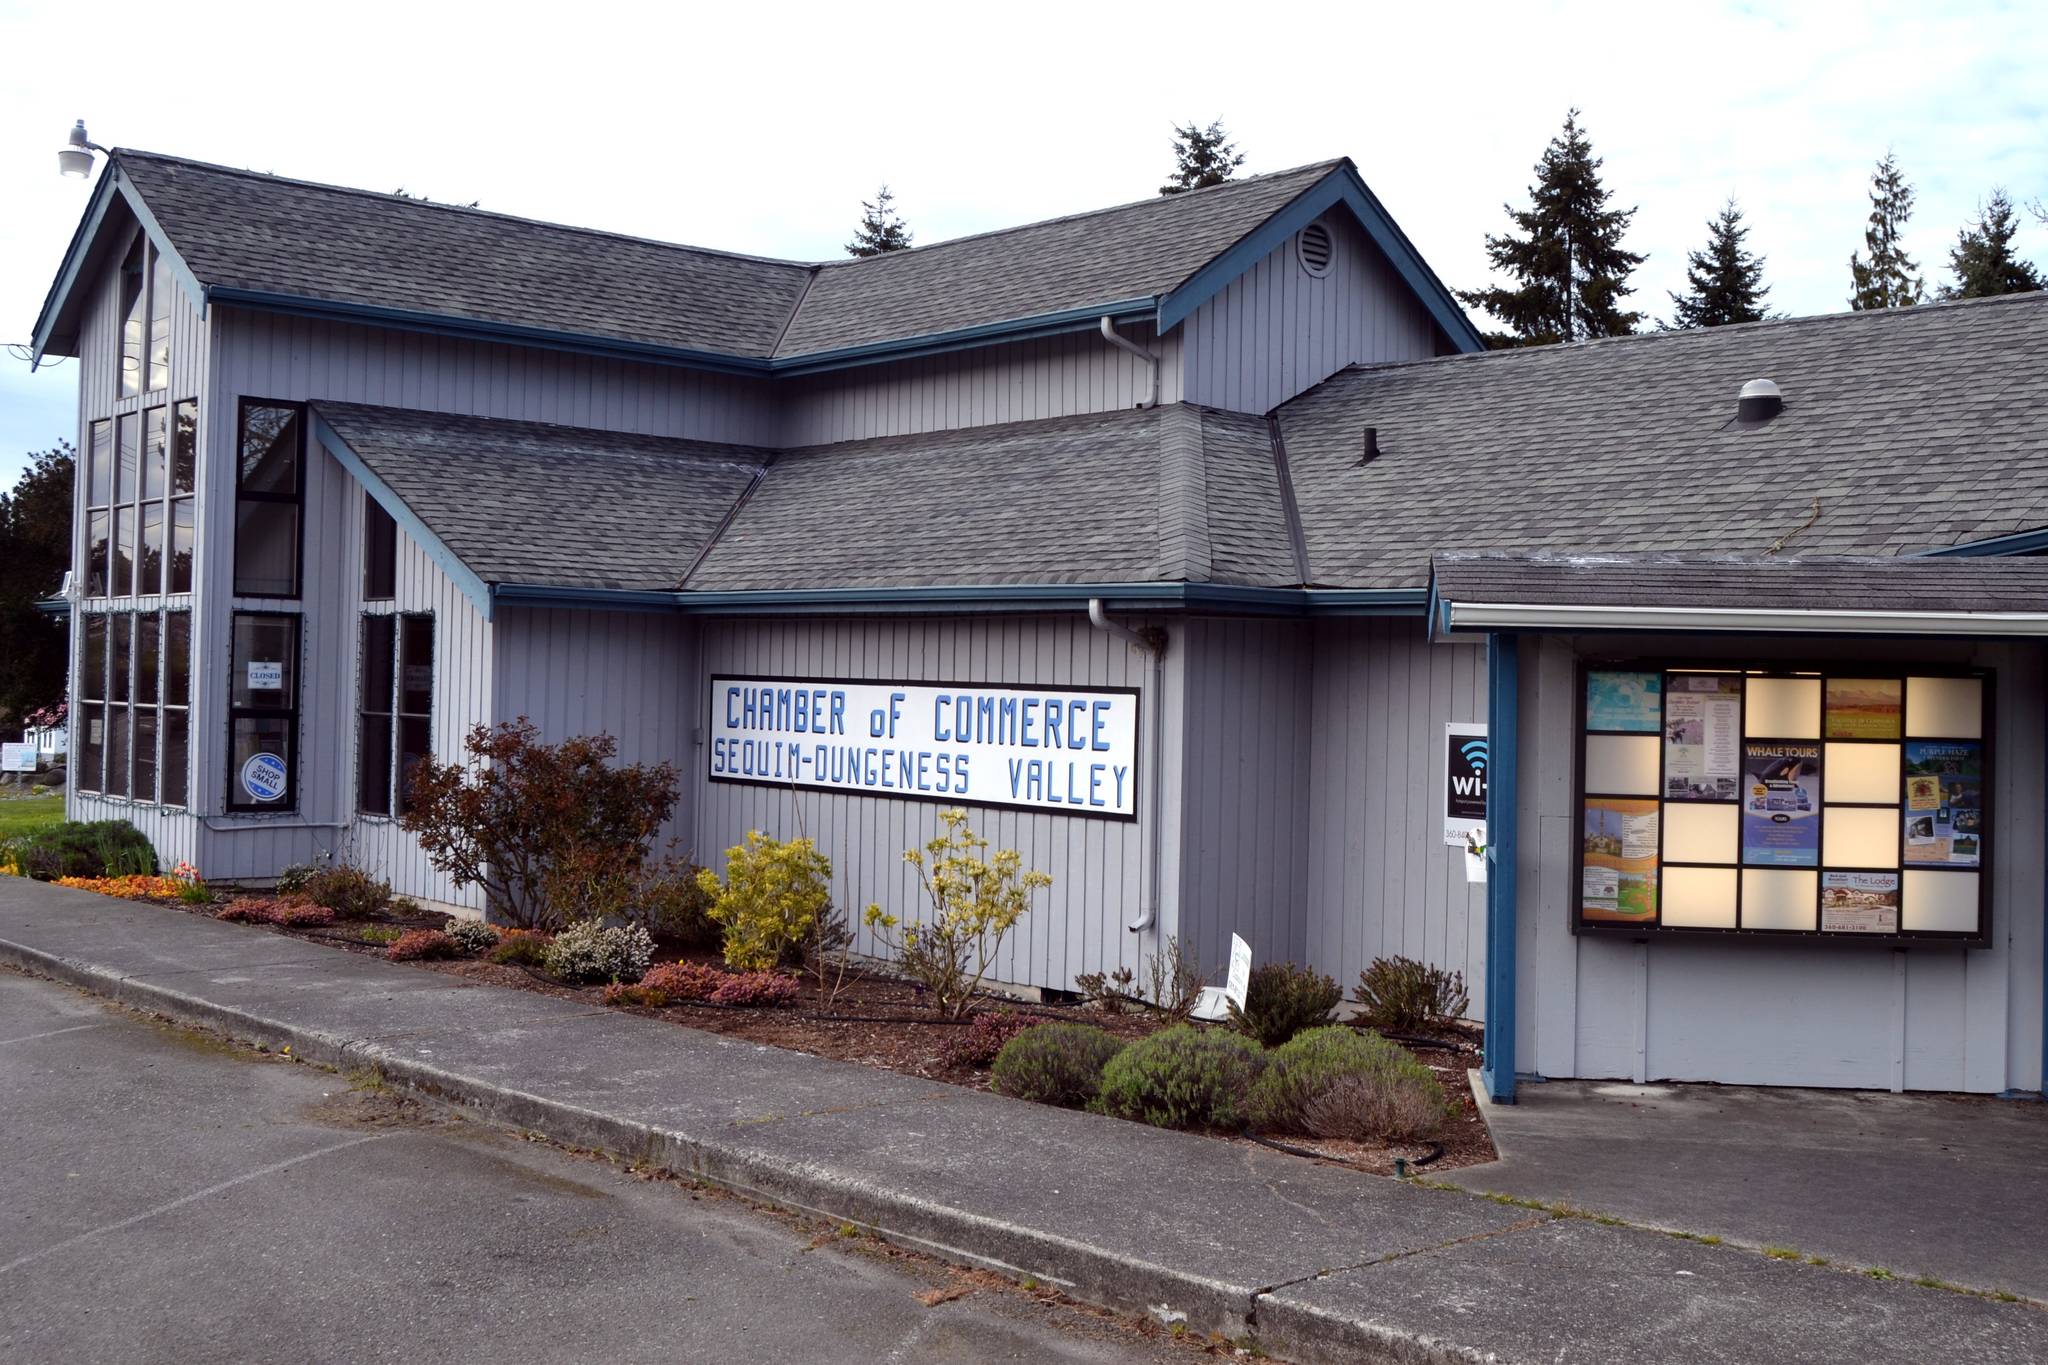 Sequim-Dungeness Valley Chamber of Commerce staff and board members recently started a Small Business Relief Fund to help Sequim area businesses struggling during the COVID-19 pandemic. Sequim Gazette photo by Matthew Nash